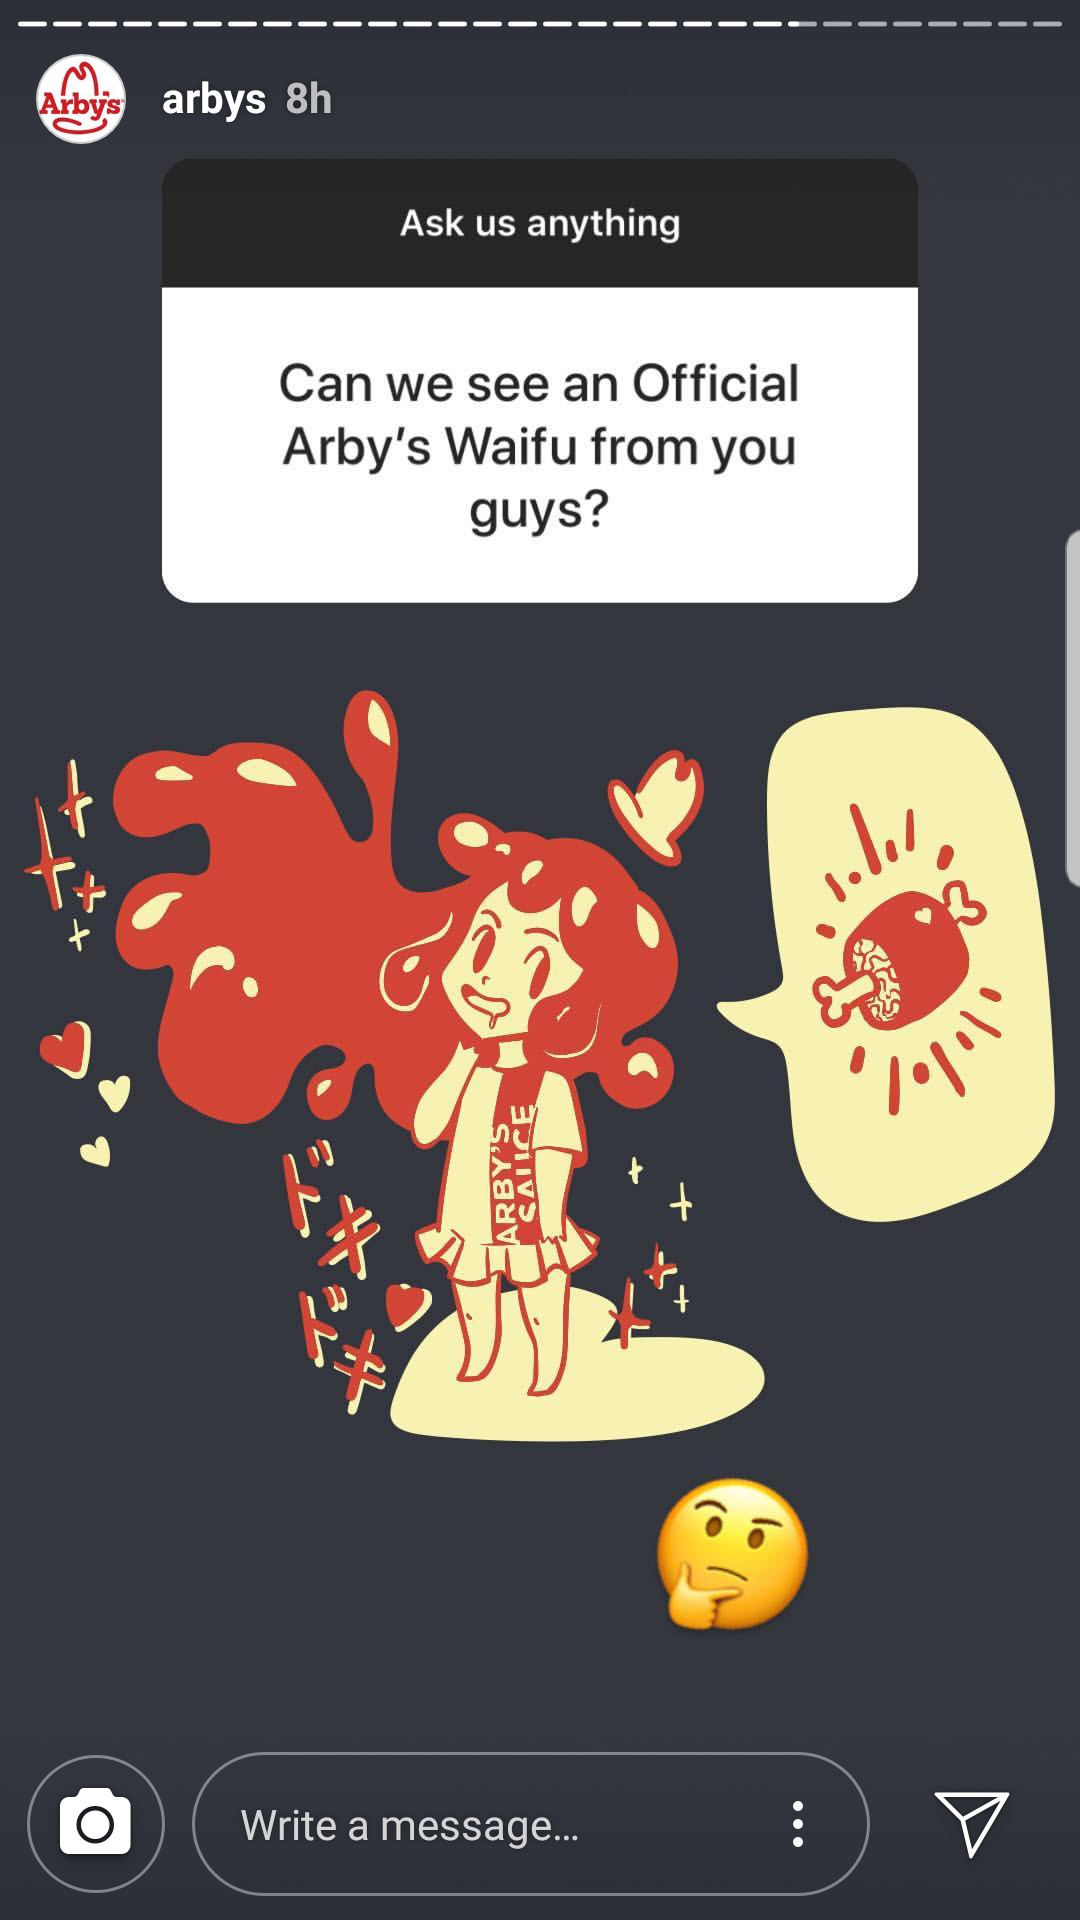 arbys waifu - Arbys arbys 8h Ask us anything Can we see an Official Arby's Waifu from you guys? Obrze 21 O Write a message... Write a message. V